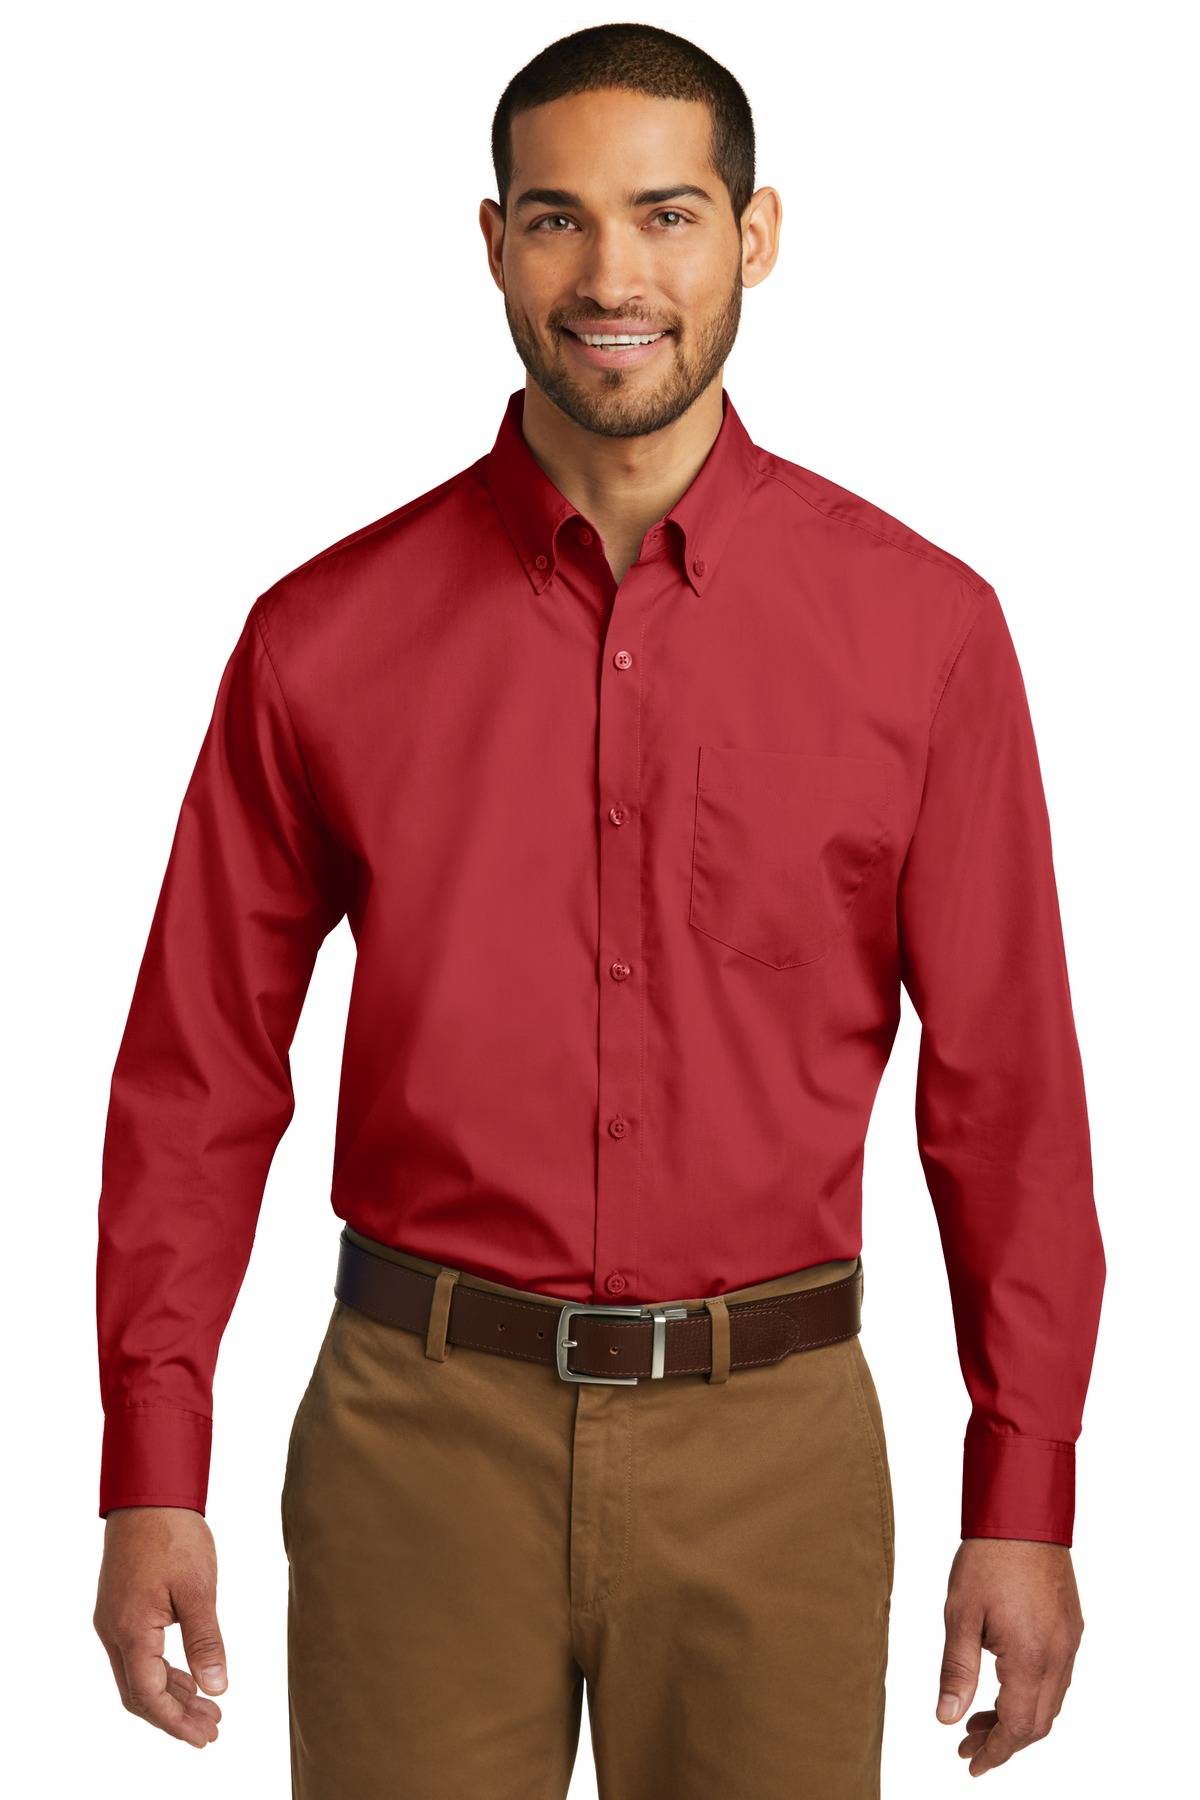 Port Authority W100 Mens Long Sleeve Lightweight Button Down Carefree Poplin Shirt With Pocket